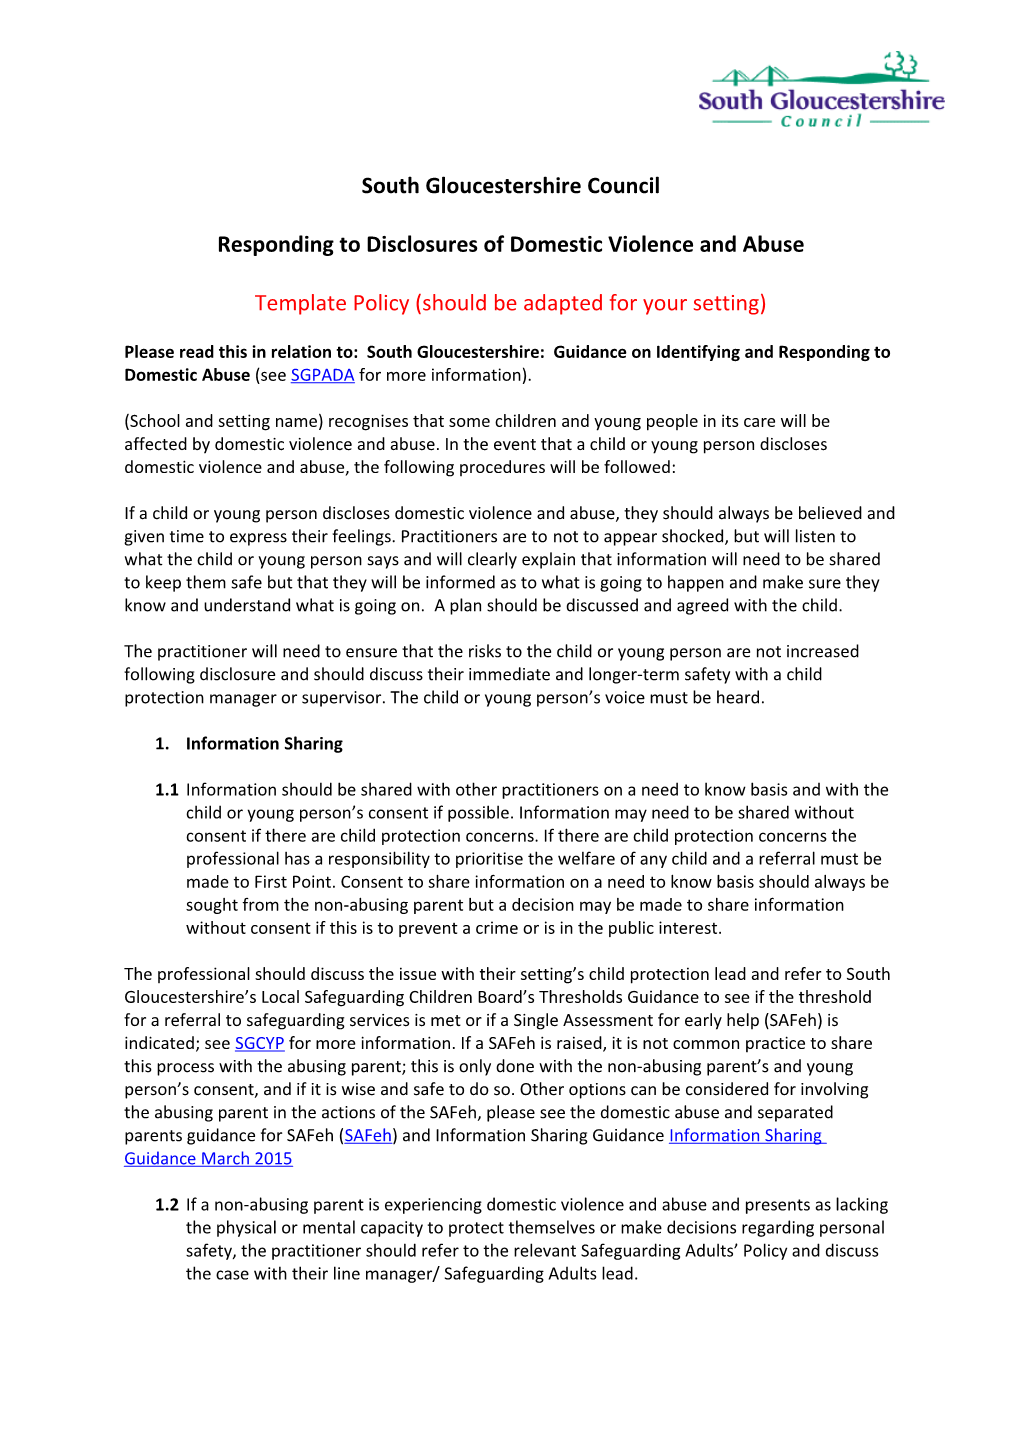 Responding to Disclosures of Domestic Violence and Abuse